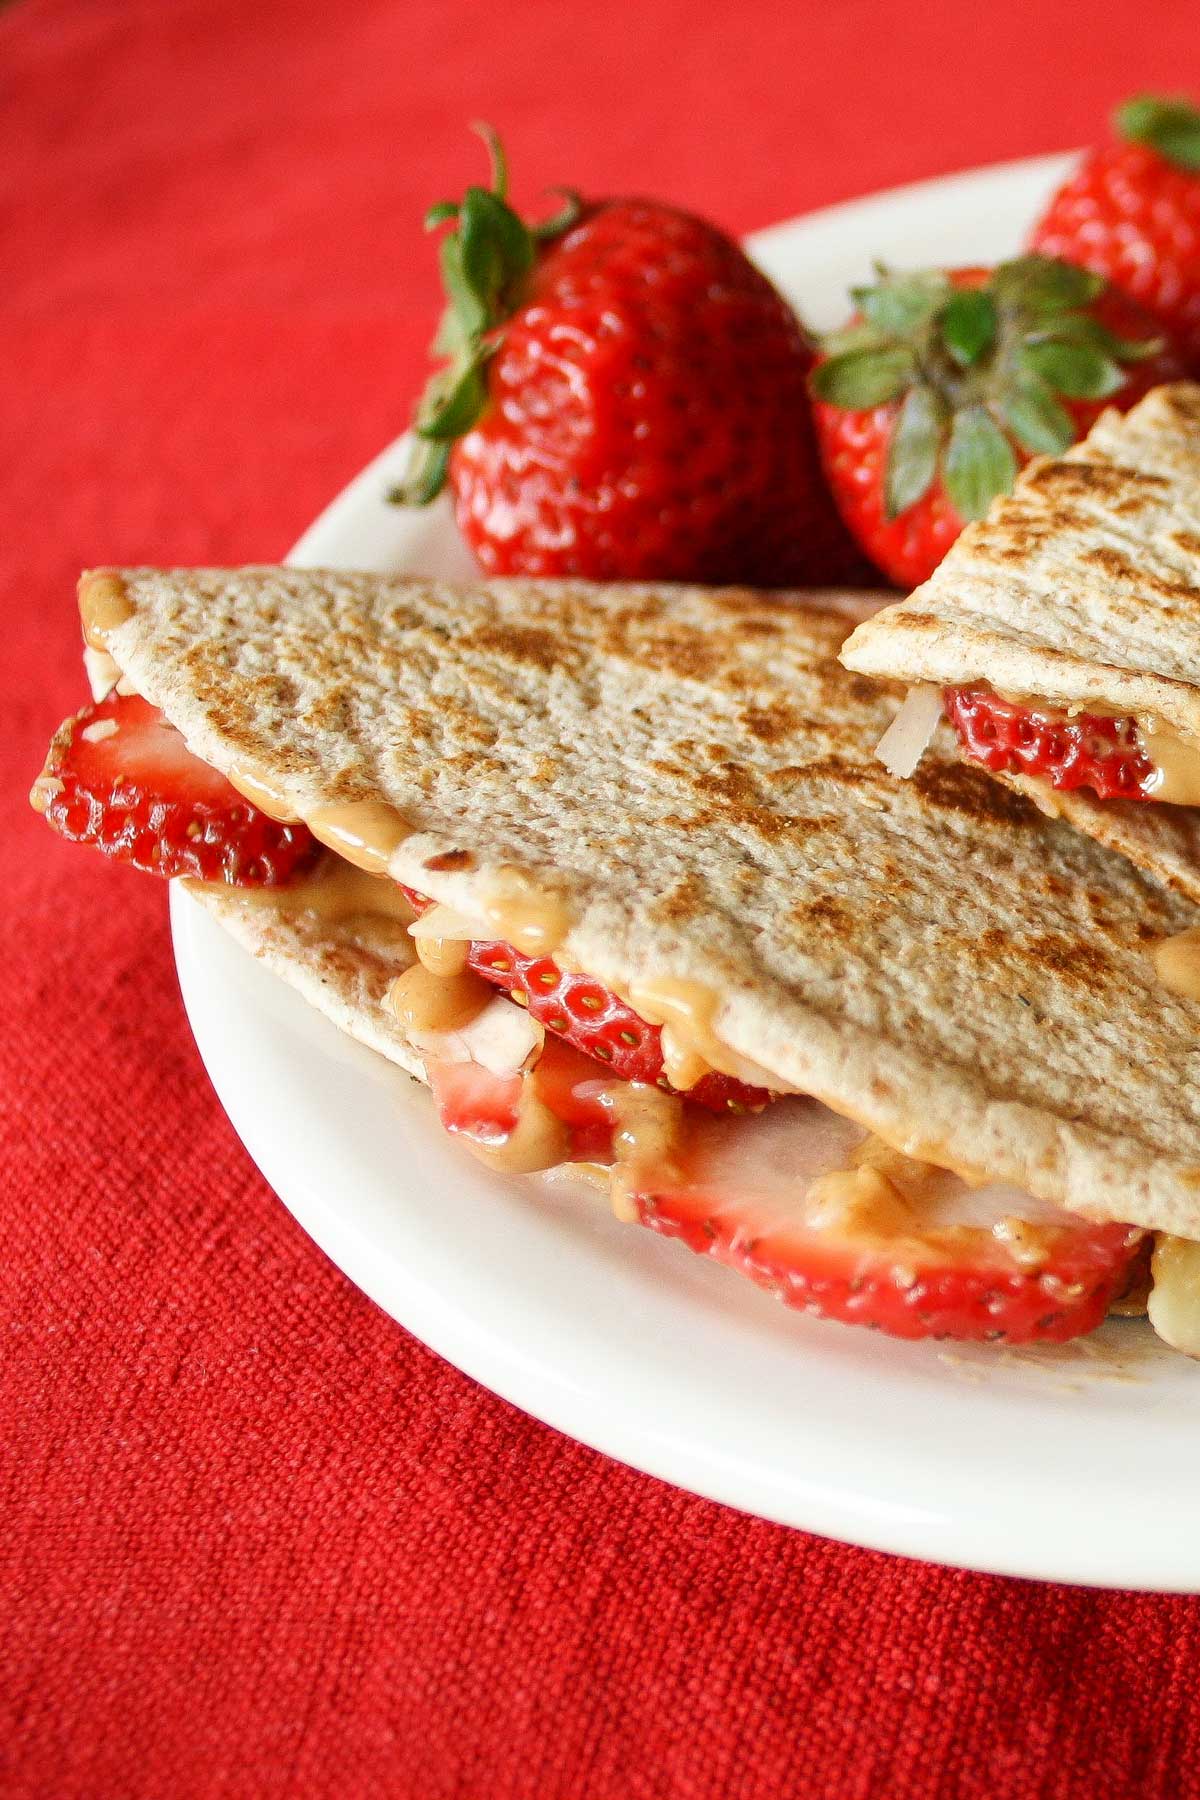 Closeup of on folded, grilled tortilla stuffed with strawberries and warmed peanut butter, garnished with more berries.